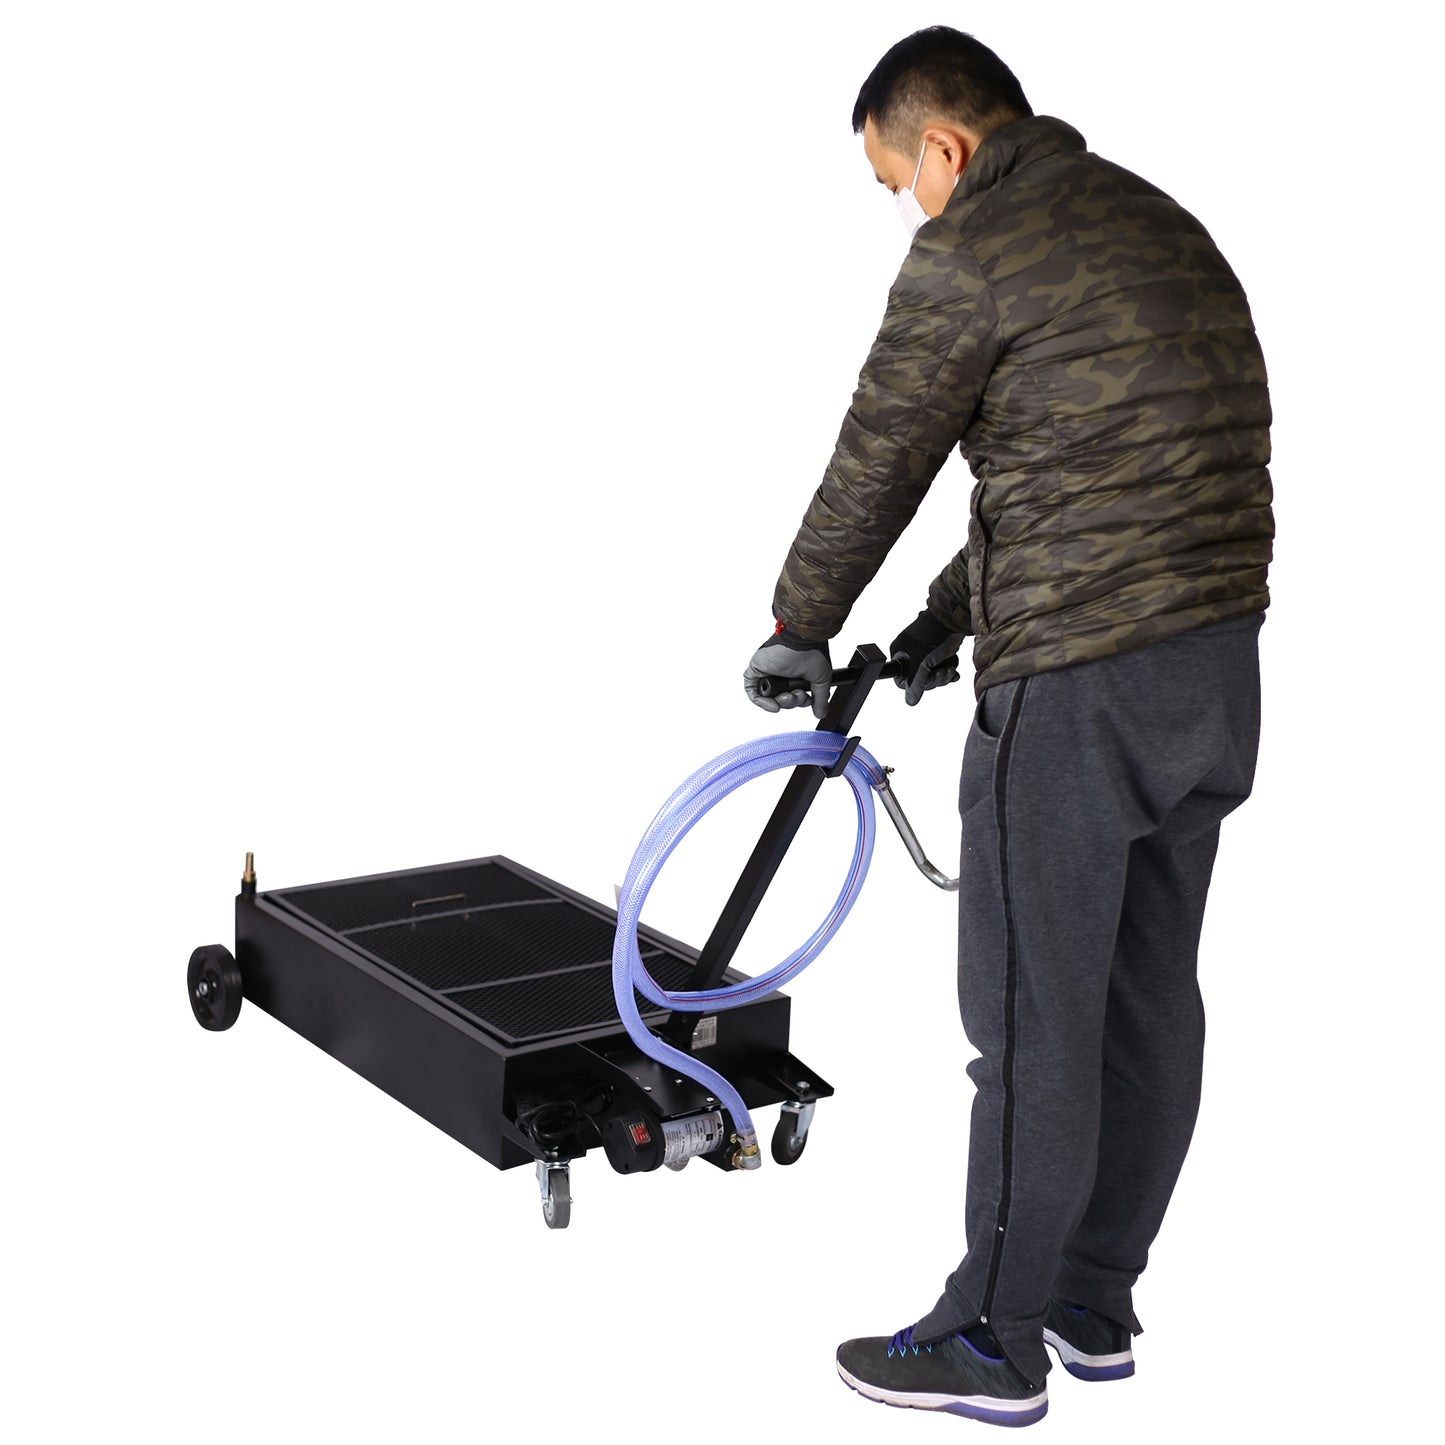 20 gallon low profile oil drainer, with electric pump